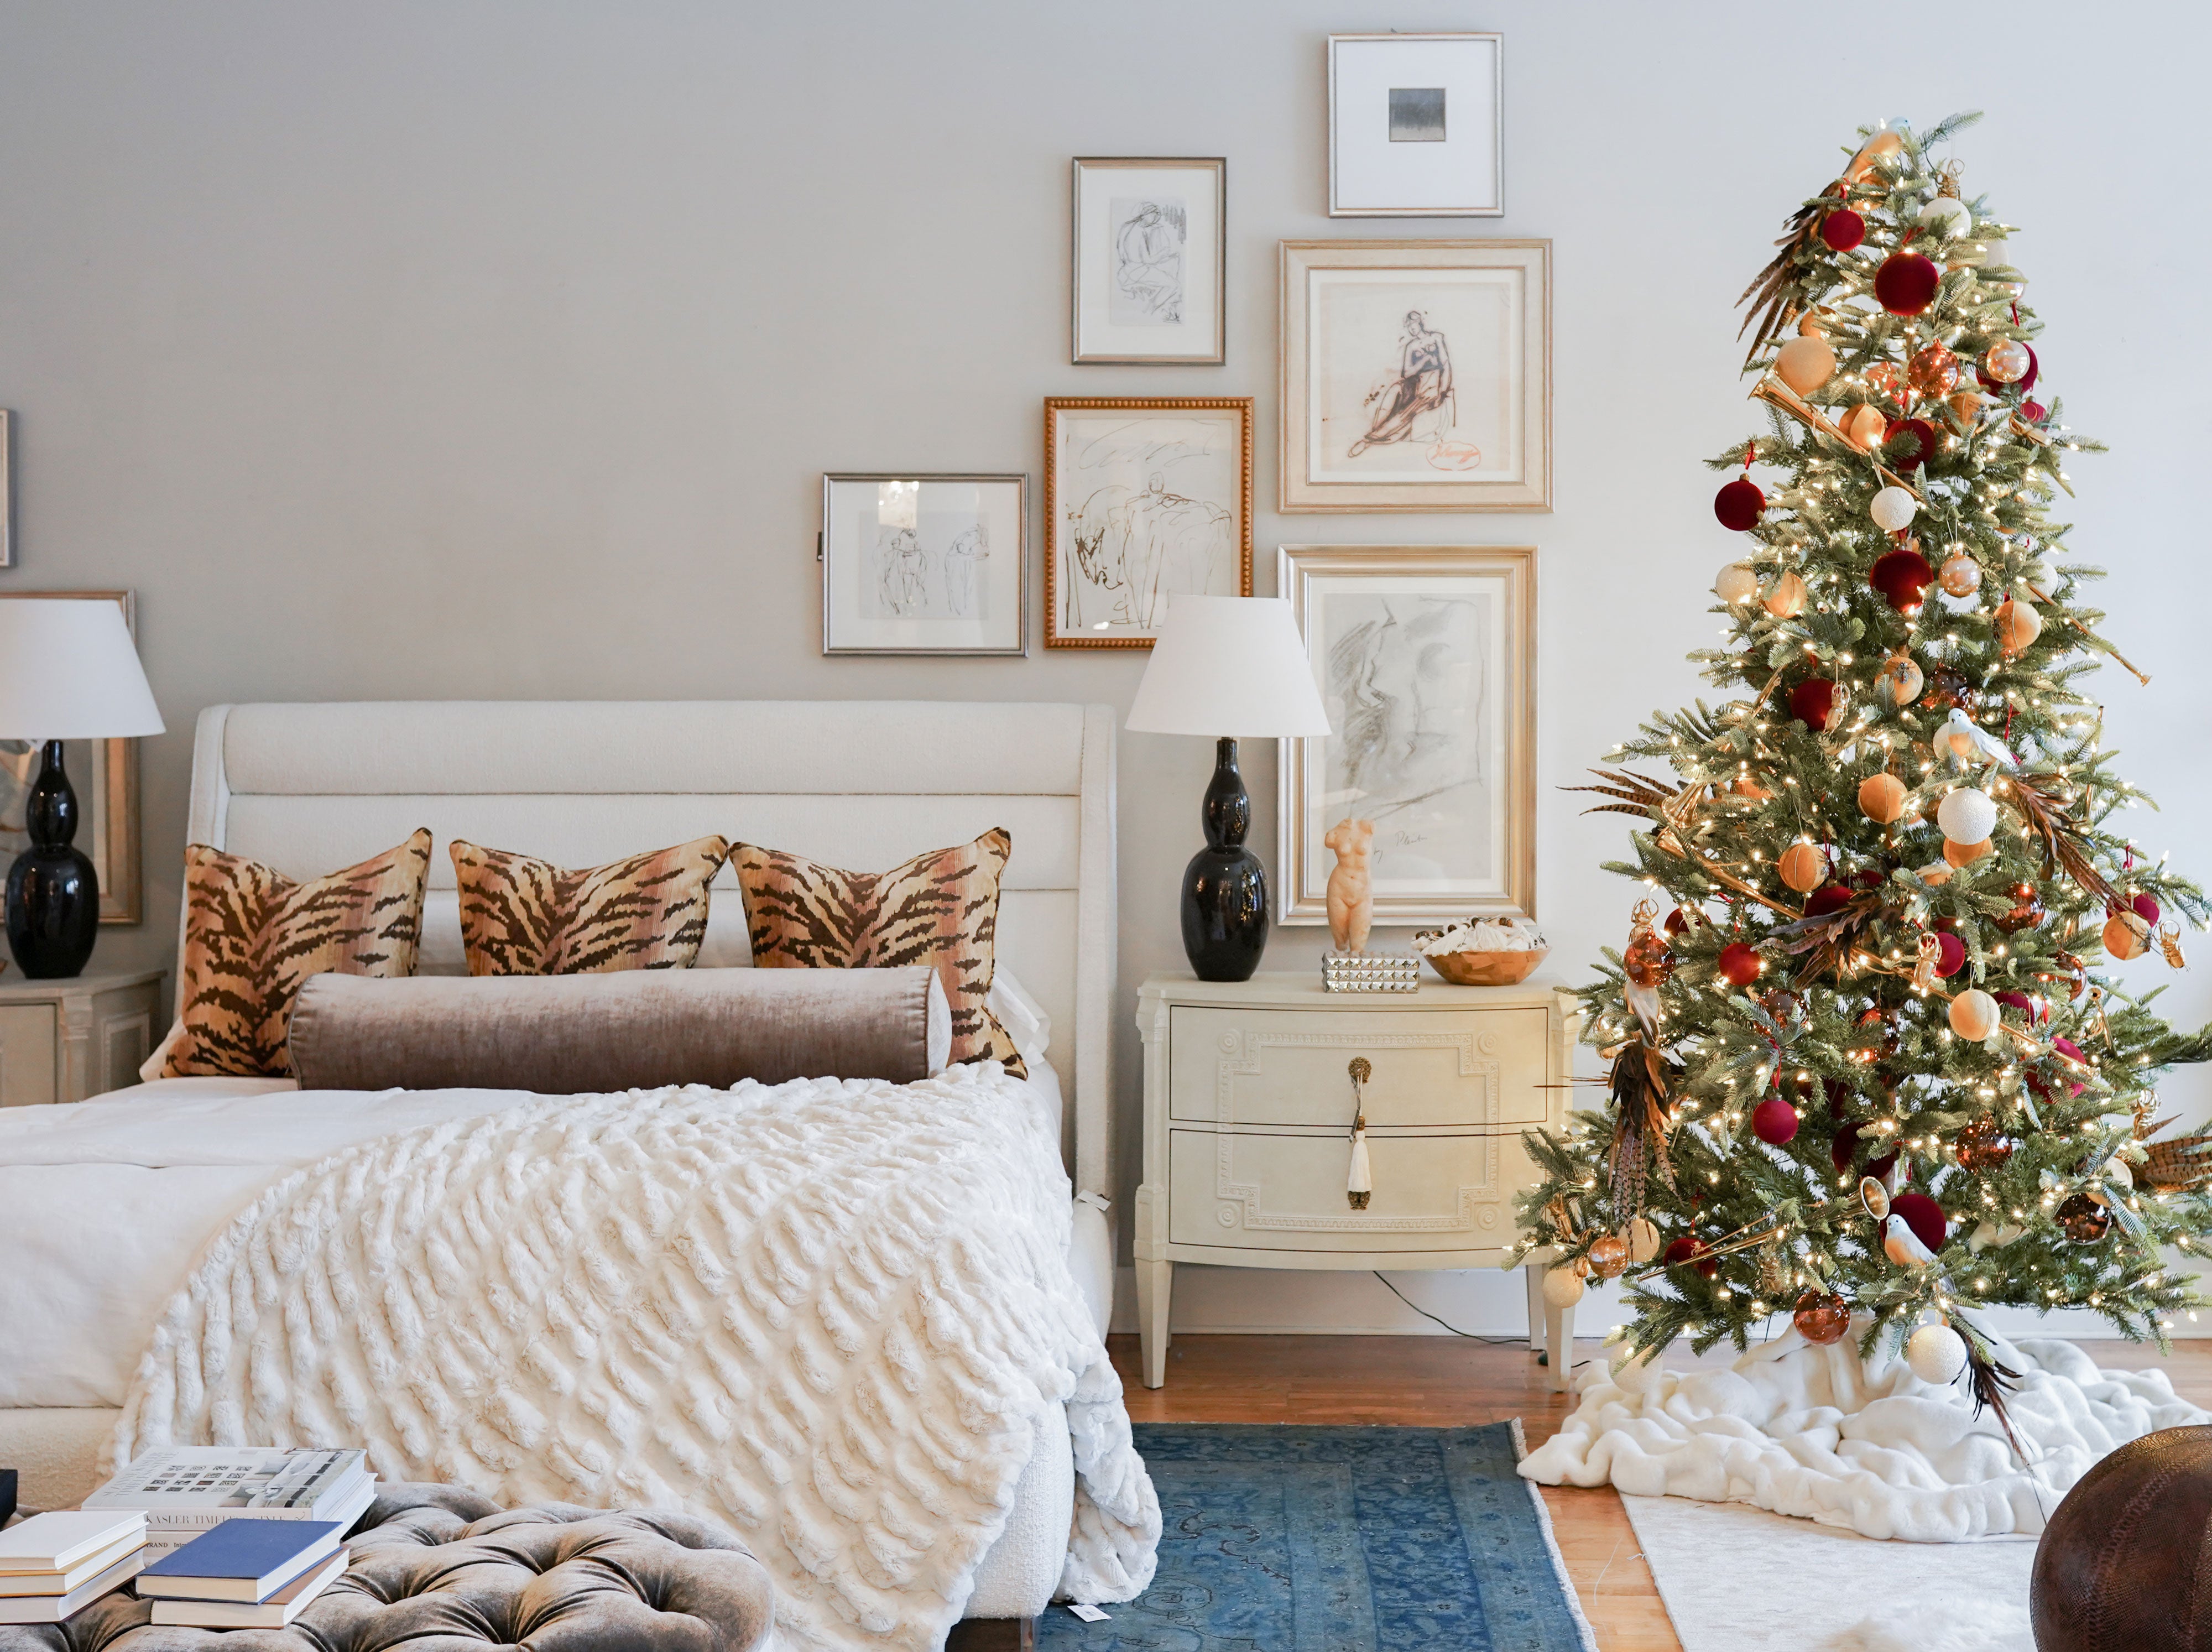 Hosting for the Holidays | Alice Lane Home Collection